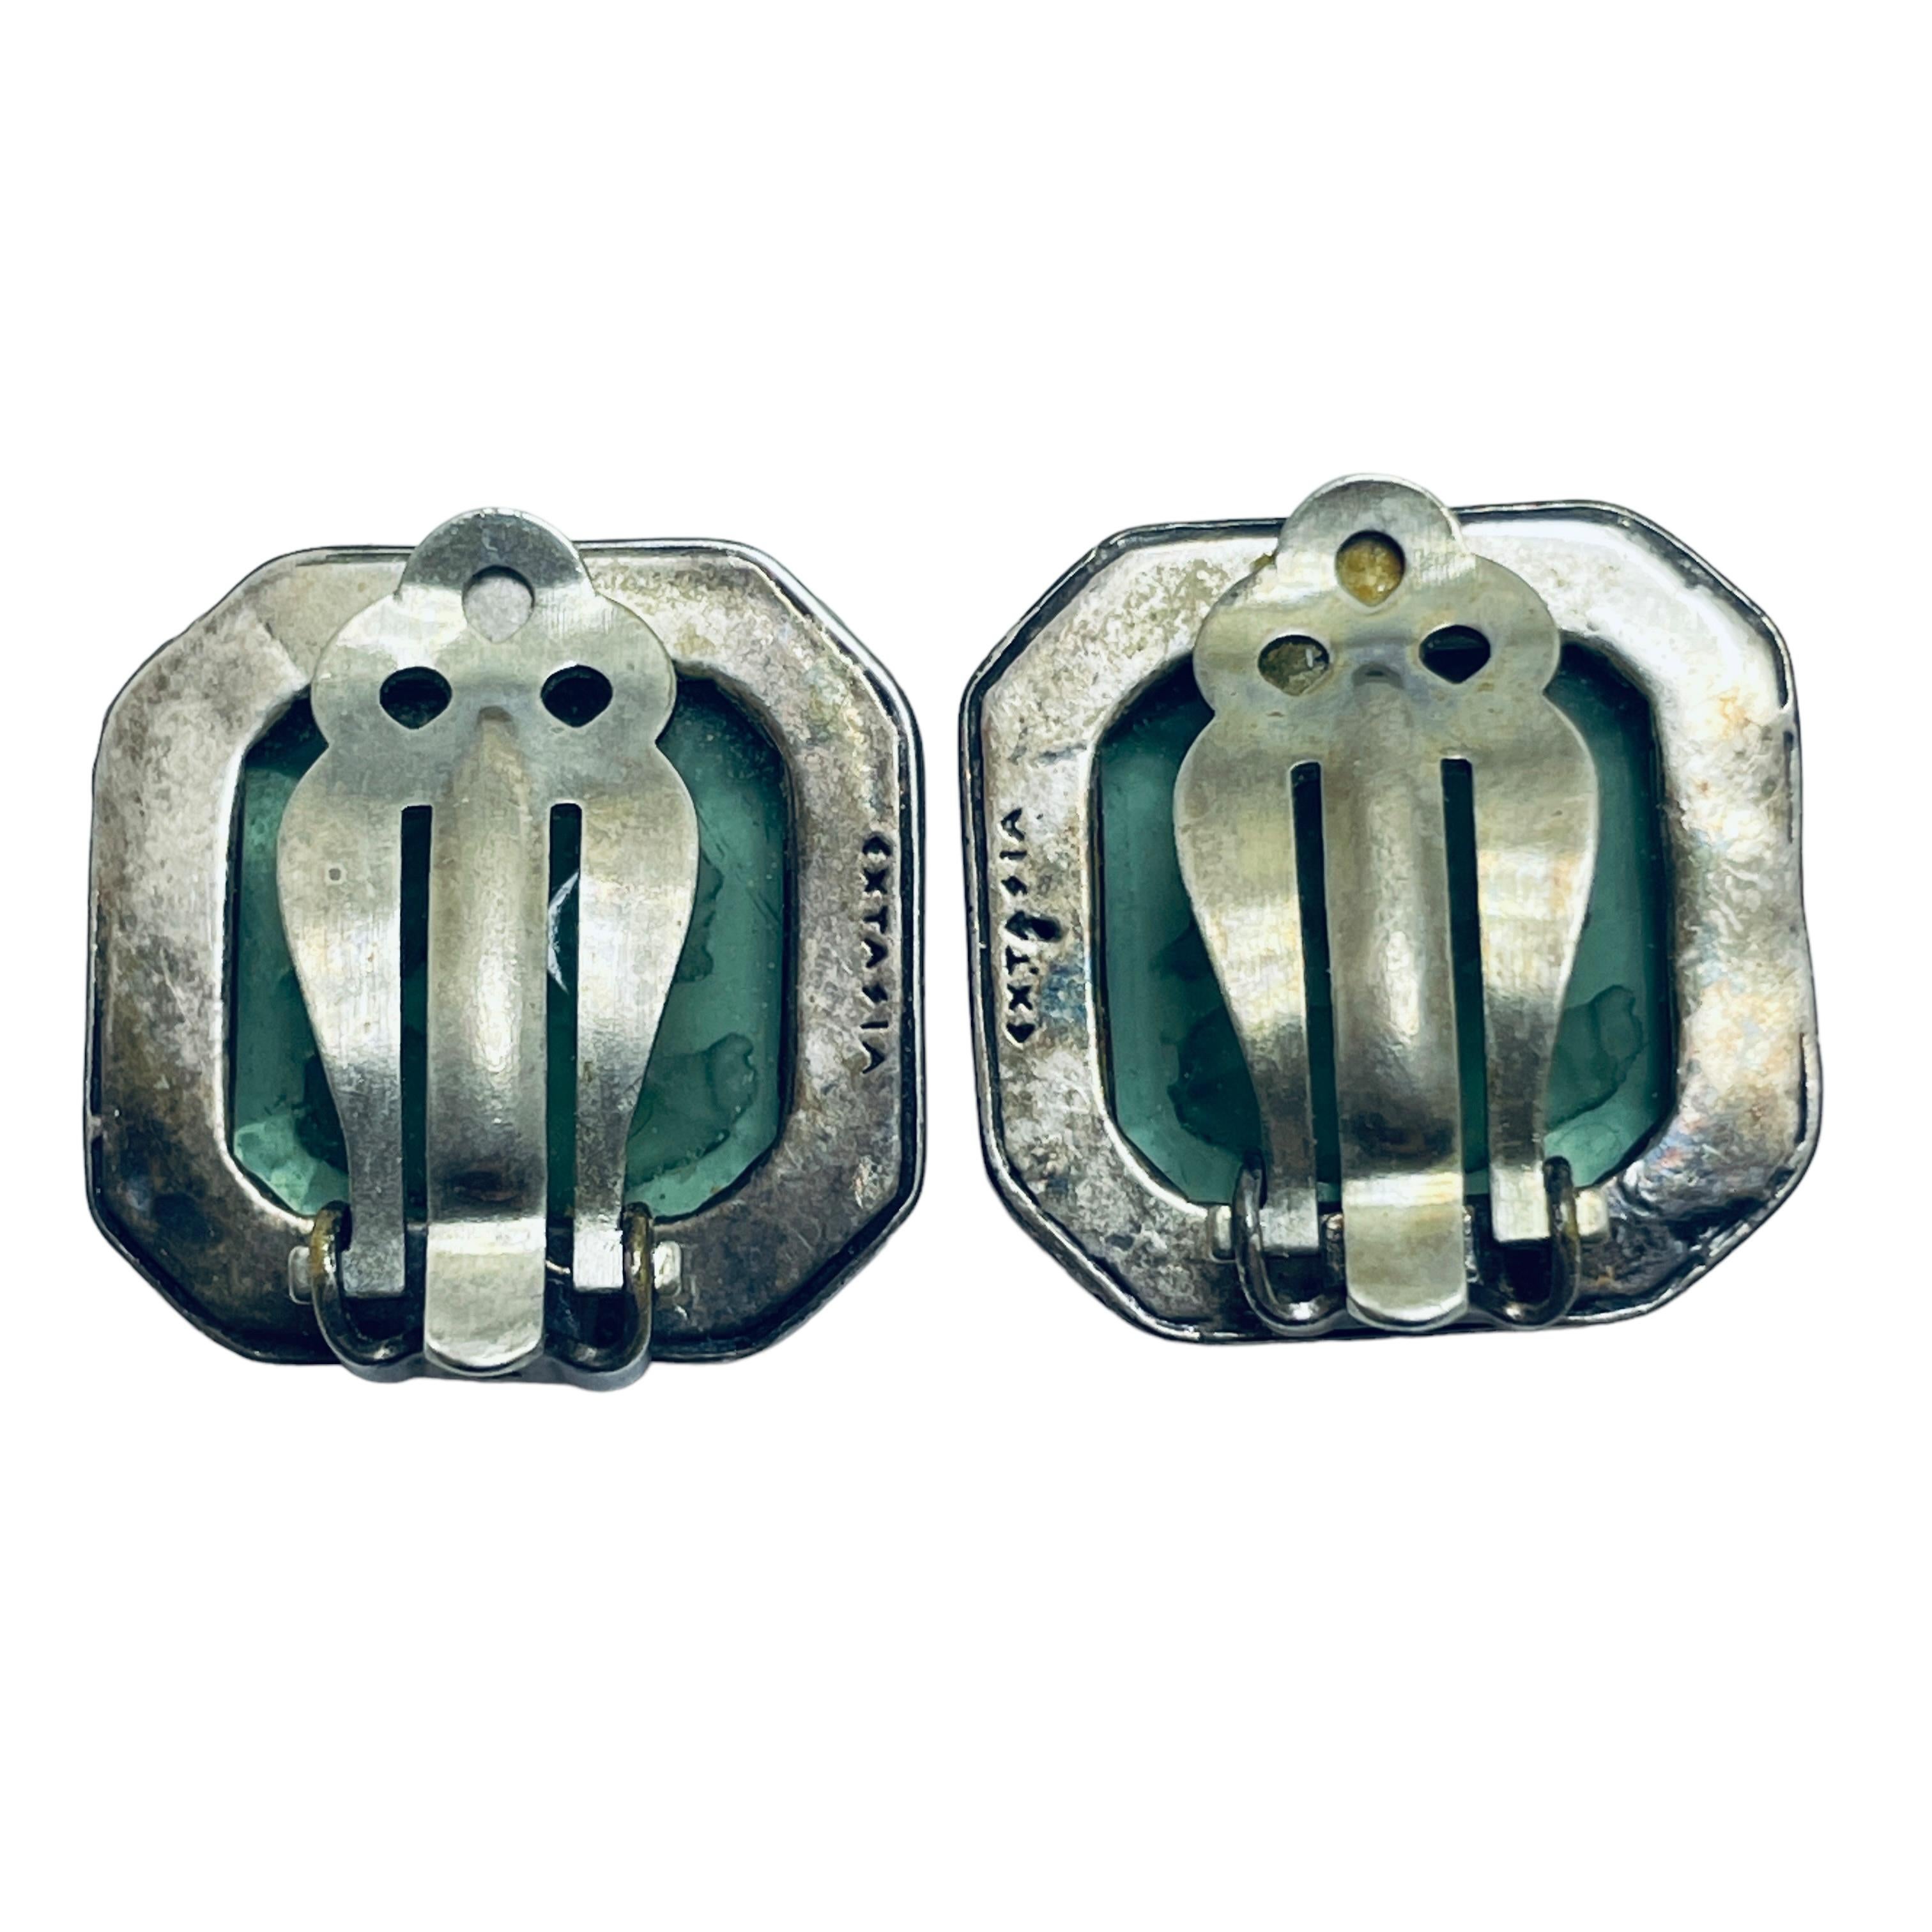 EXTASIA vintage silver tone green glass intaglio cameo designer clip on earrings In Good Condition For Sale In Palos Hills, IL